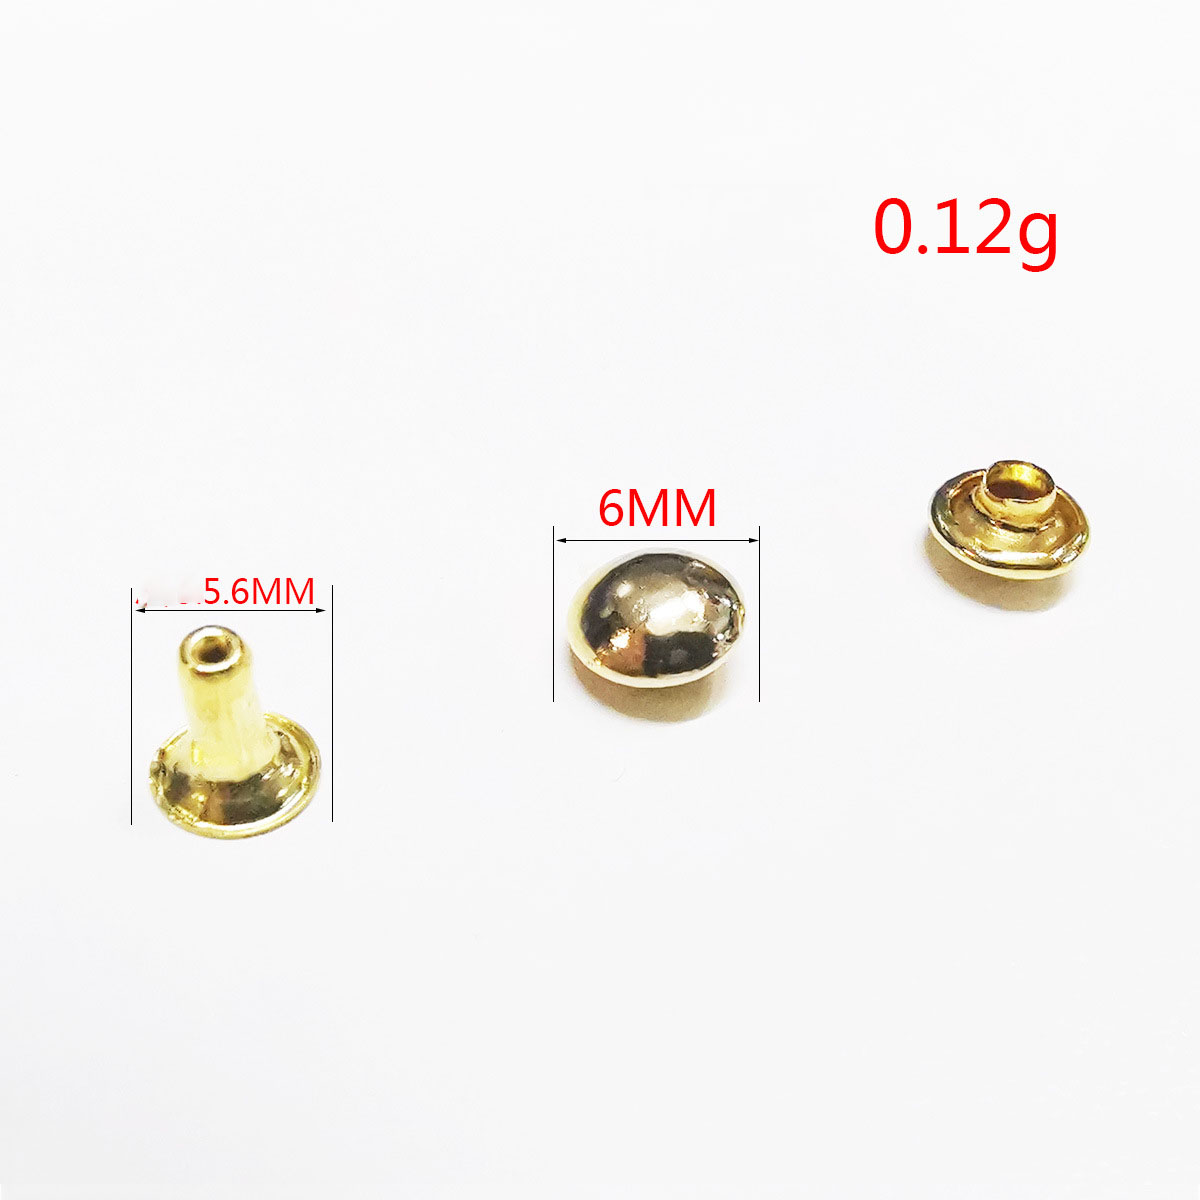 16:7mm gold